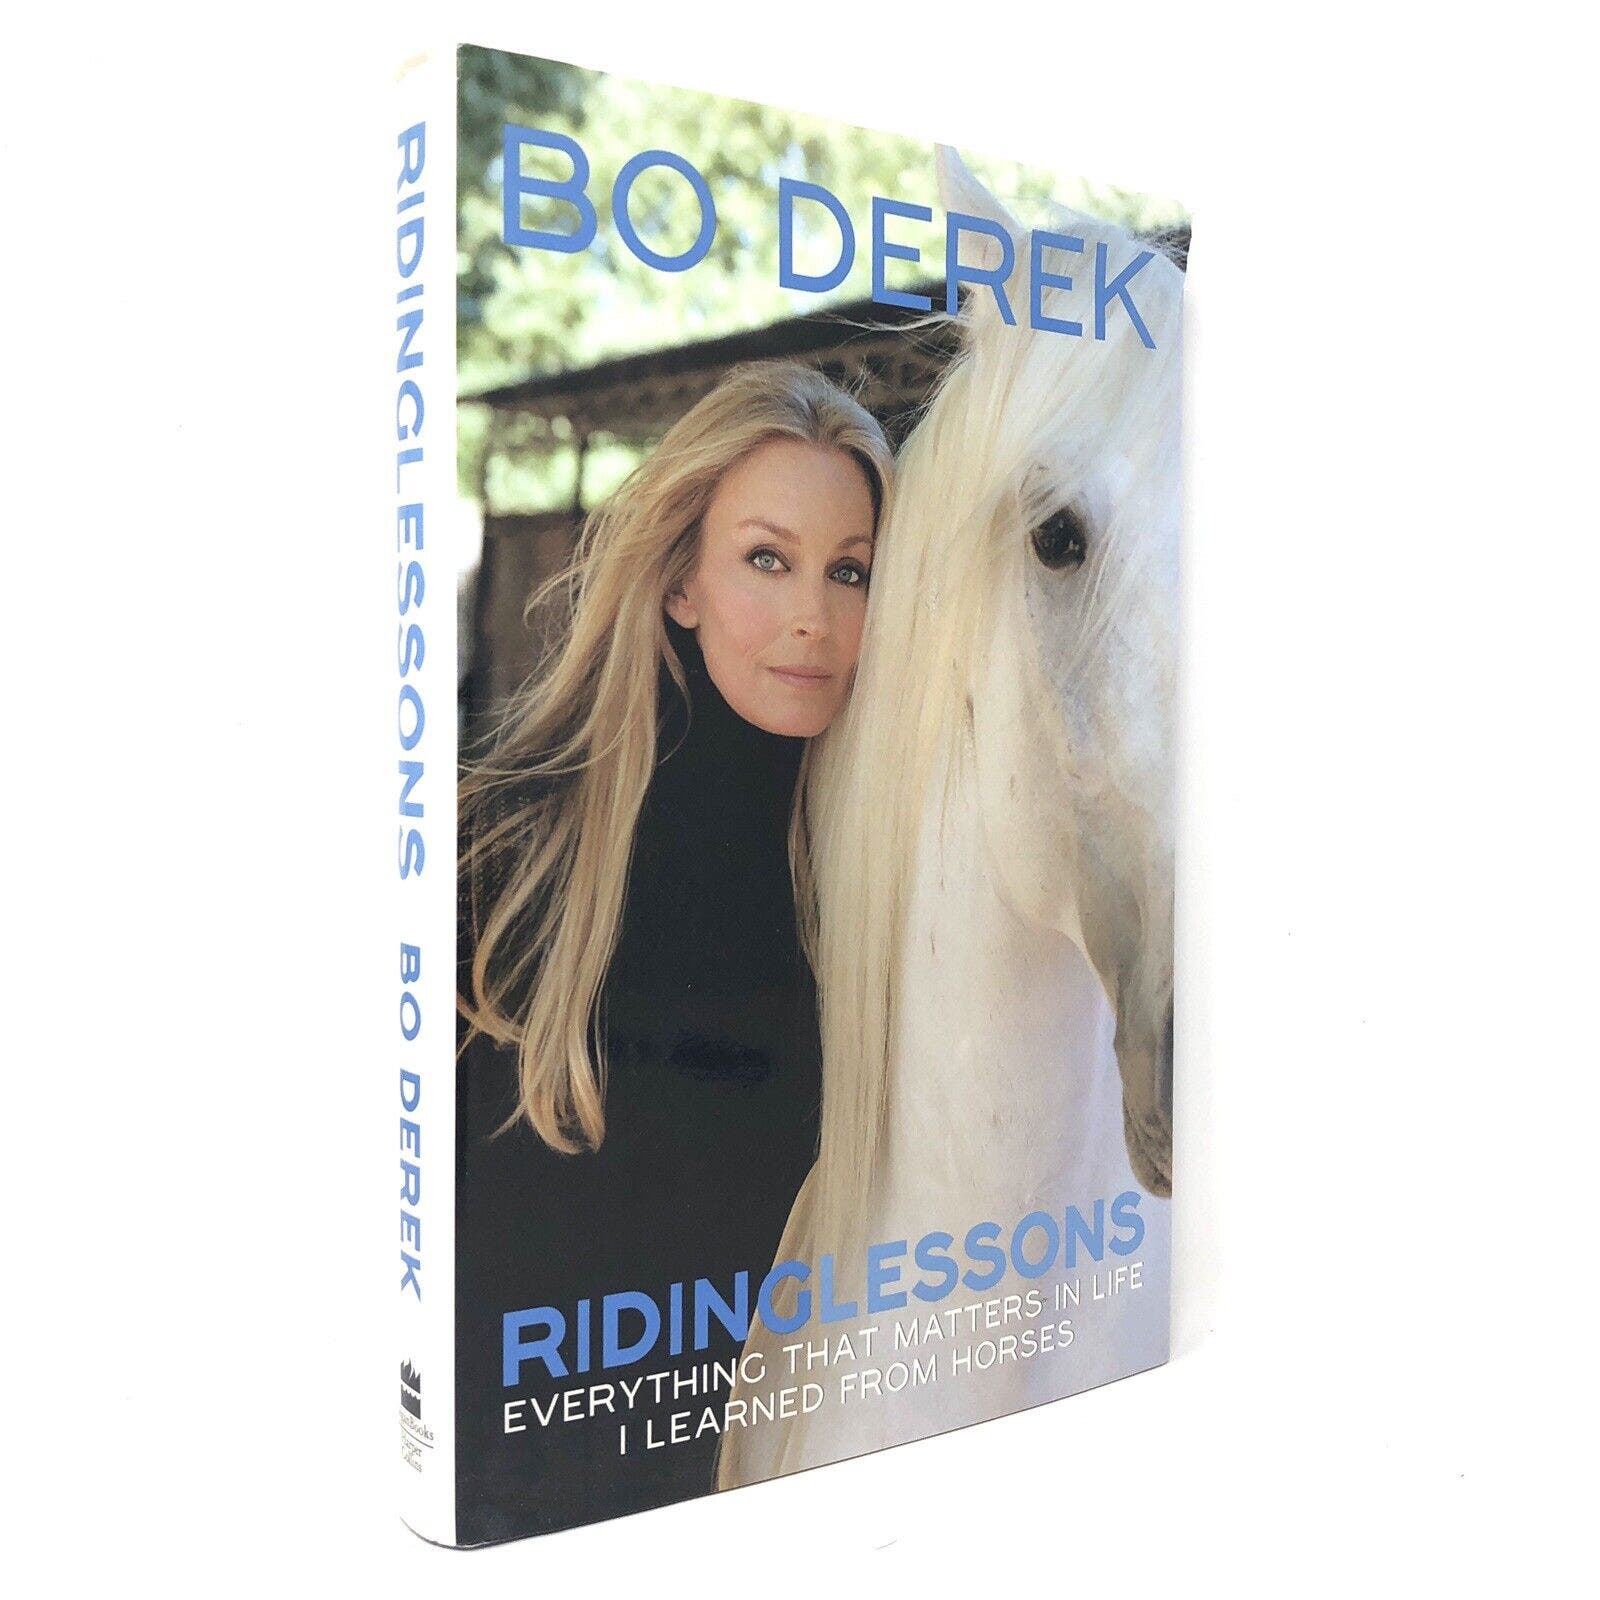 (Signed) Riding Lessons: Everything That Matters In Life I Learned By Bo Derek - Uncle Buddy's Beard & Used Books